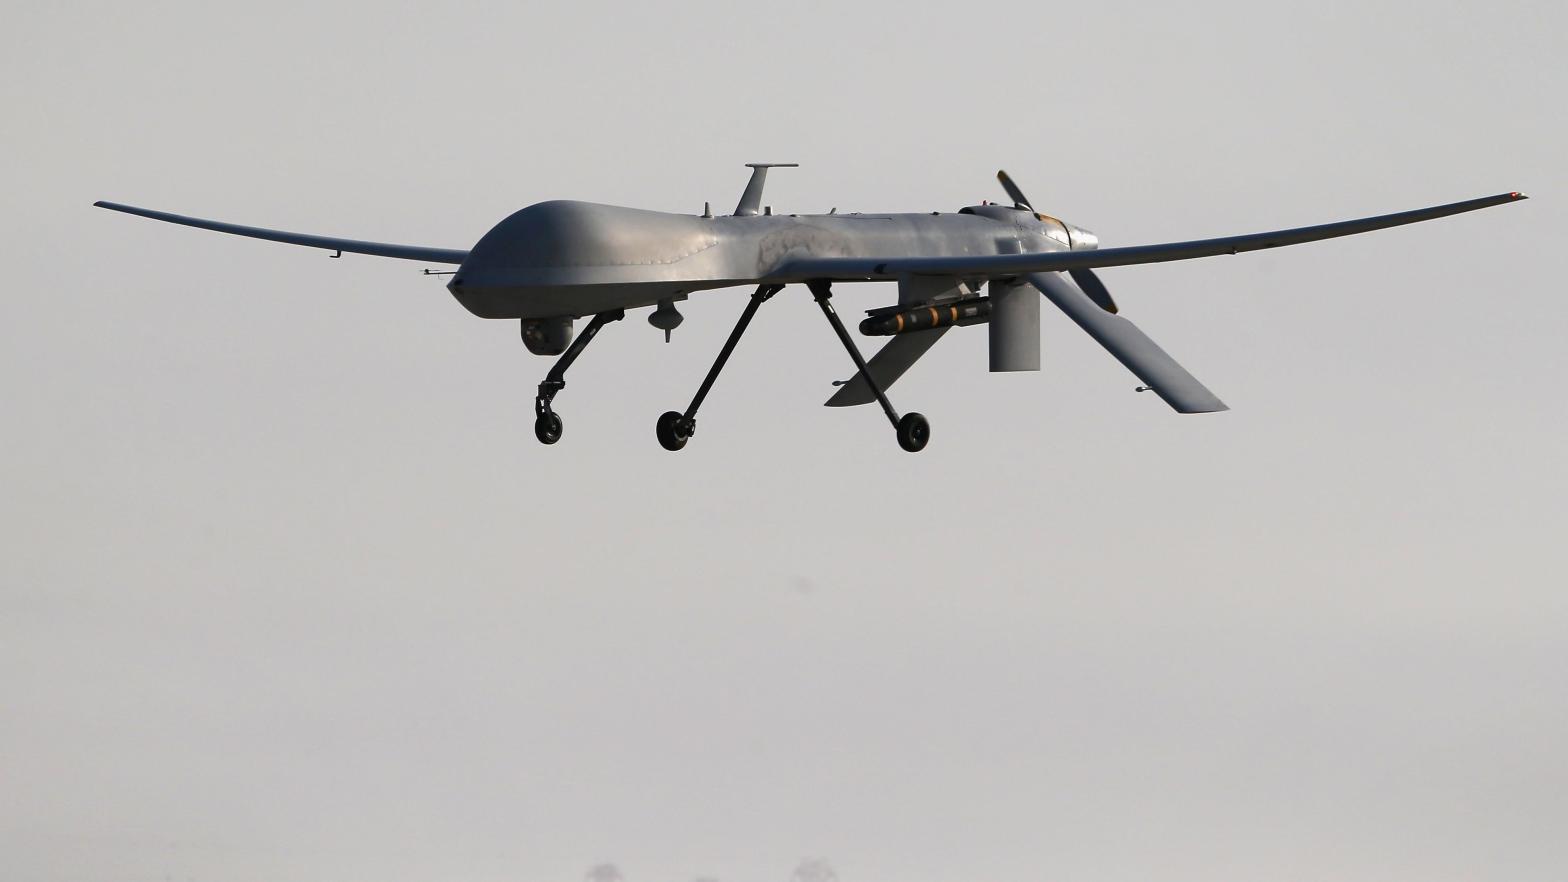 File photo of a U.S. Air Force MQ-1B Predator unmanned aerial vehicle (UAV), carrying a  Hellfire missile landing at a secret air base after flying a mission in  the Persian Gulf region on January 7, 2016. (Photo: John Moore, Getty Images)